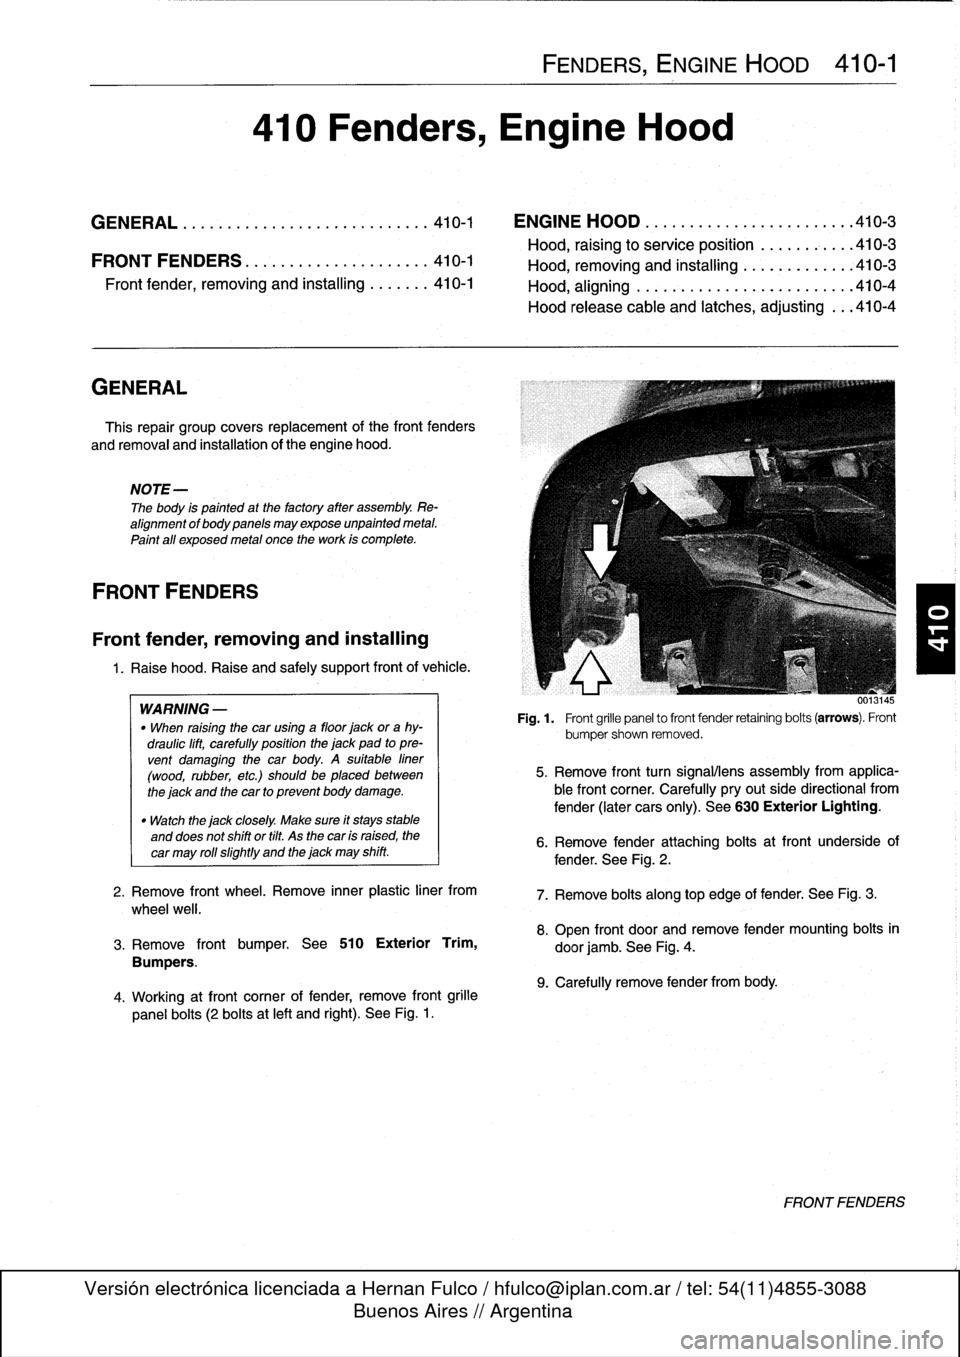 BMW 328i 1994 E36 Workshop Manual 
GENERAL

This
repair
group
covers
replacement
of
the
front
fenders

and
removal
and
installation
of
the
engine
hood
.

NOTE-

The
body
is
painted
at
the
factoryafter
assembly
.
Re-
alignment
of
body
